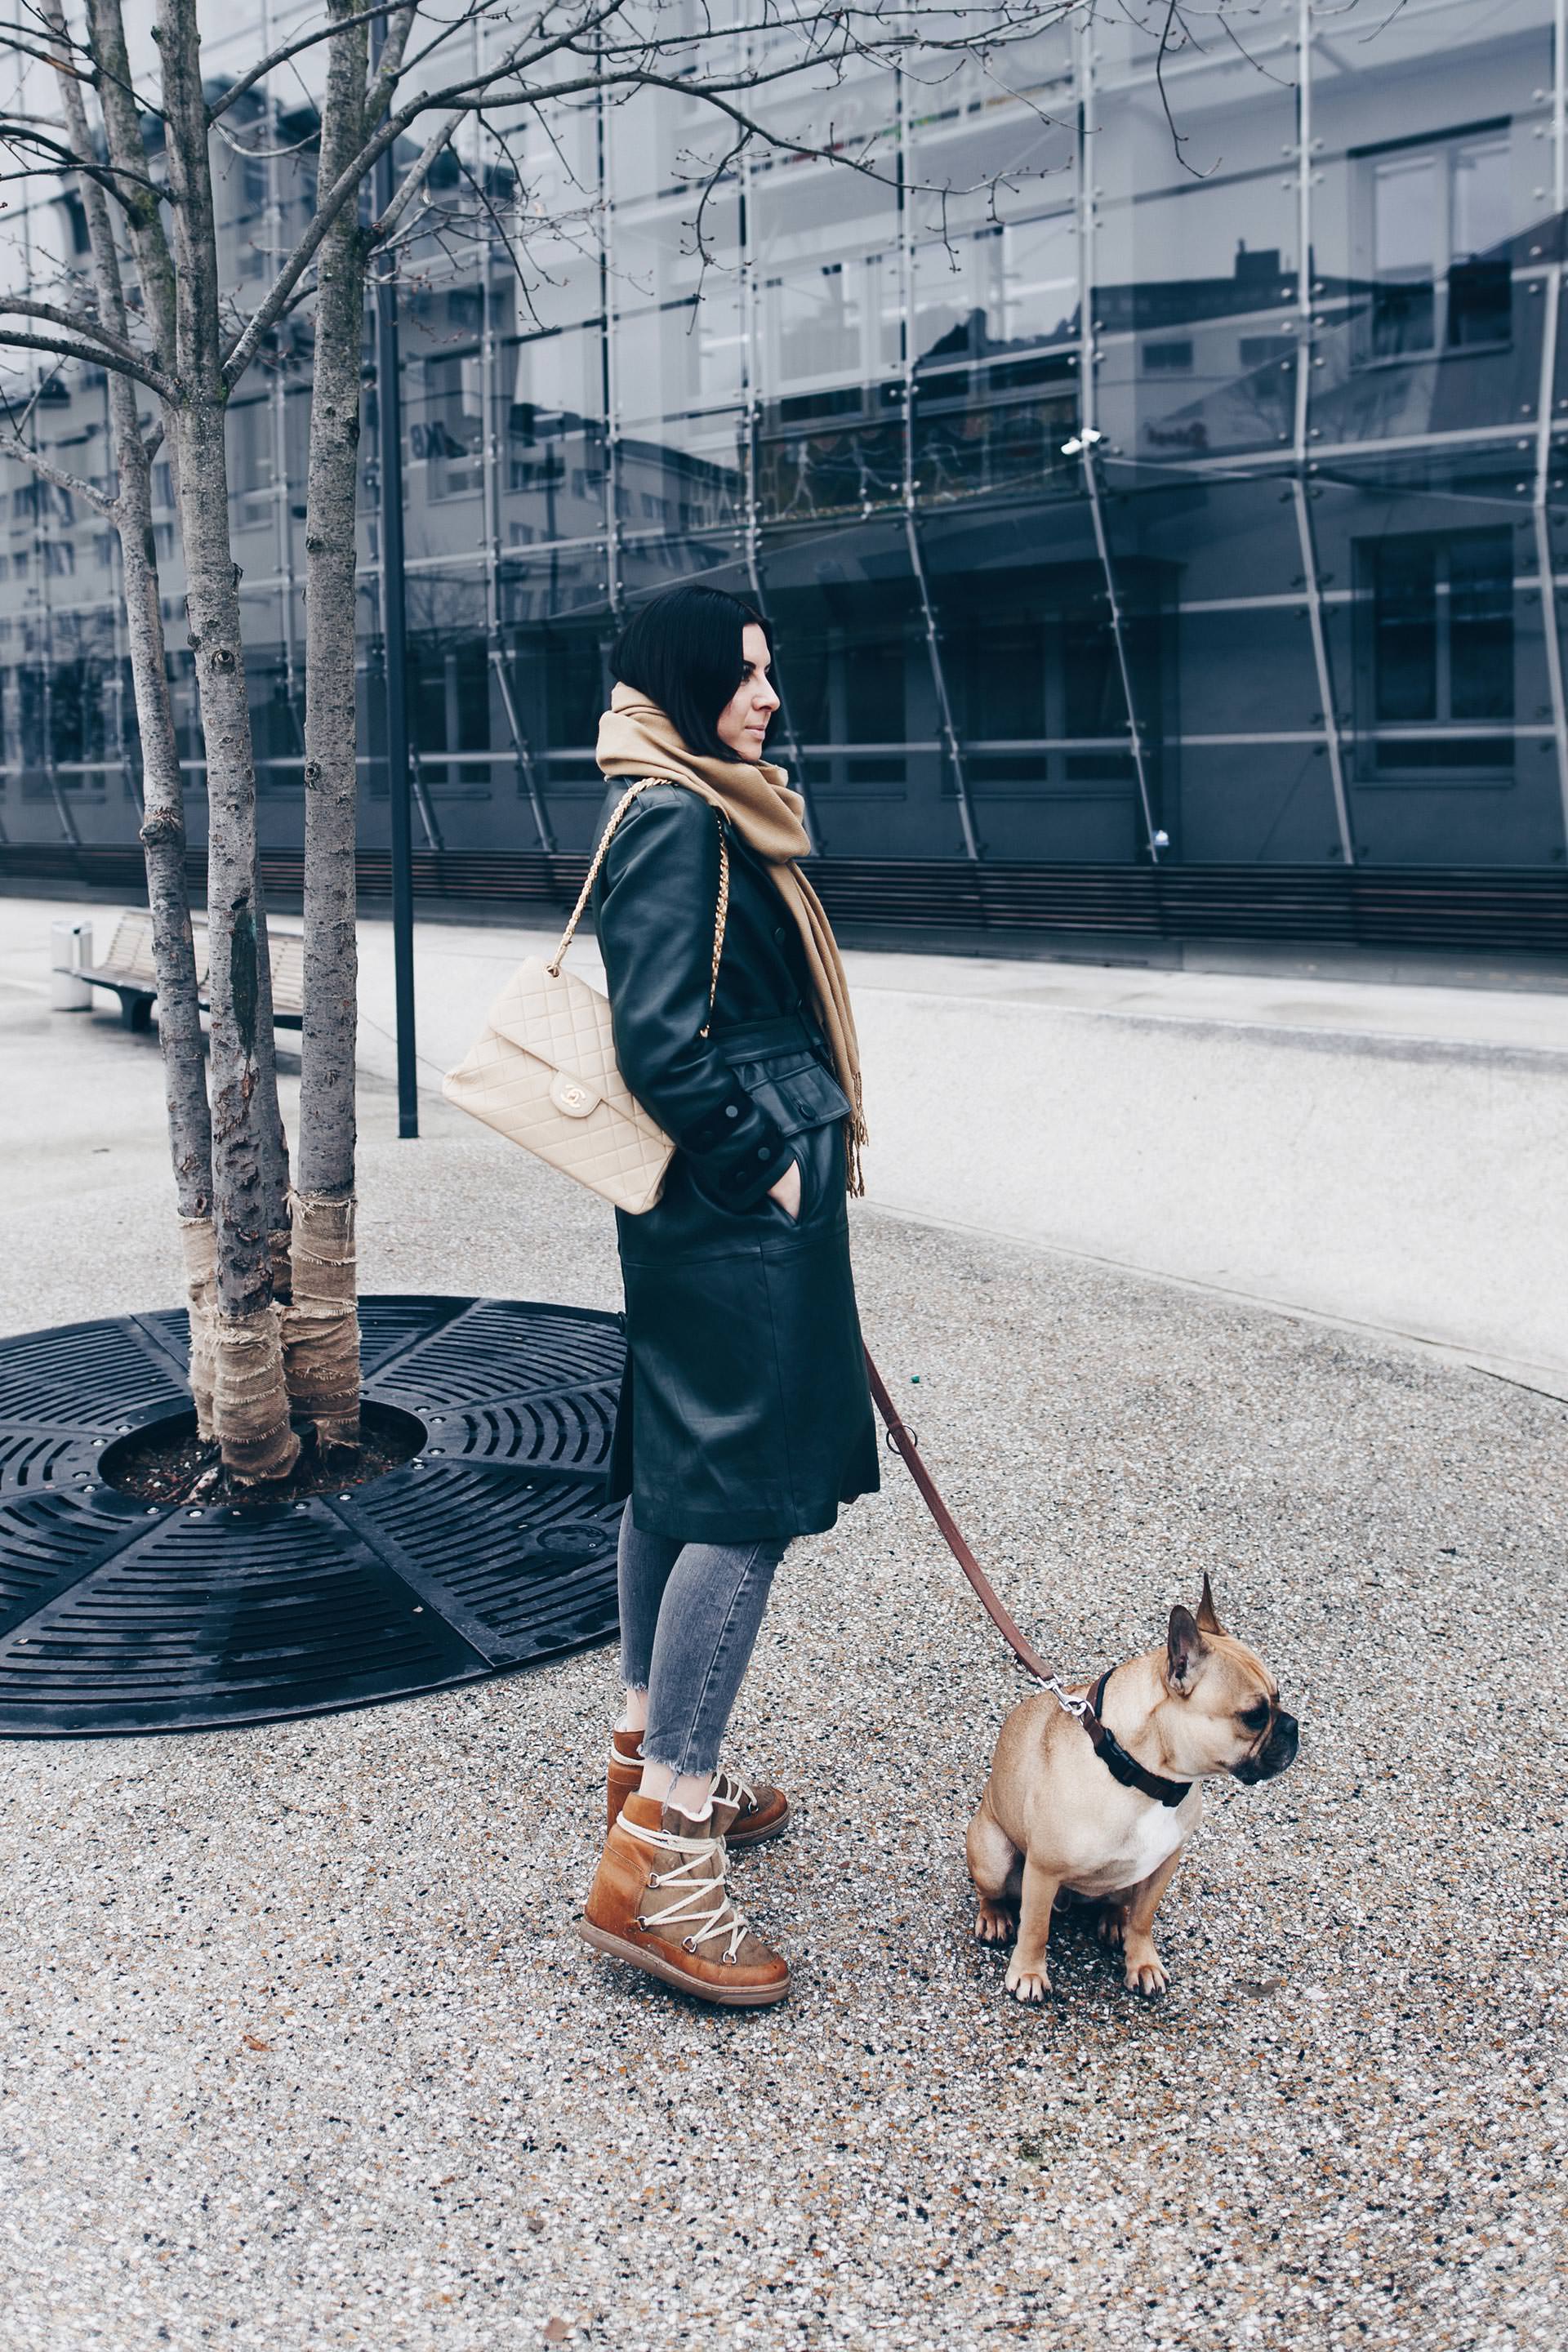 Winter Outfit mit Ledermantel aus der Zara Studio Collection 2017, Isabel Marant Nowles Boots, Skinny Jeans, Chanel Vintage Tasche, Streetstyle im Winter, Fashion Blogger Outfits, Modeblog Innsbruck, www.whoismocca.com